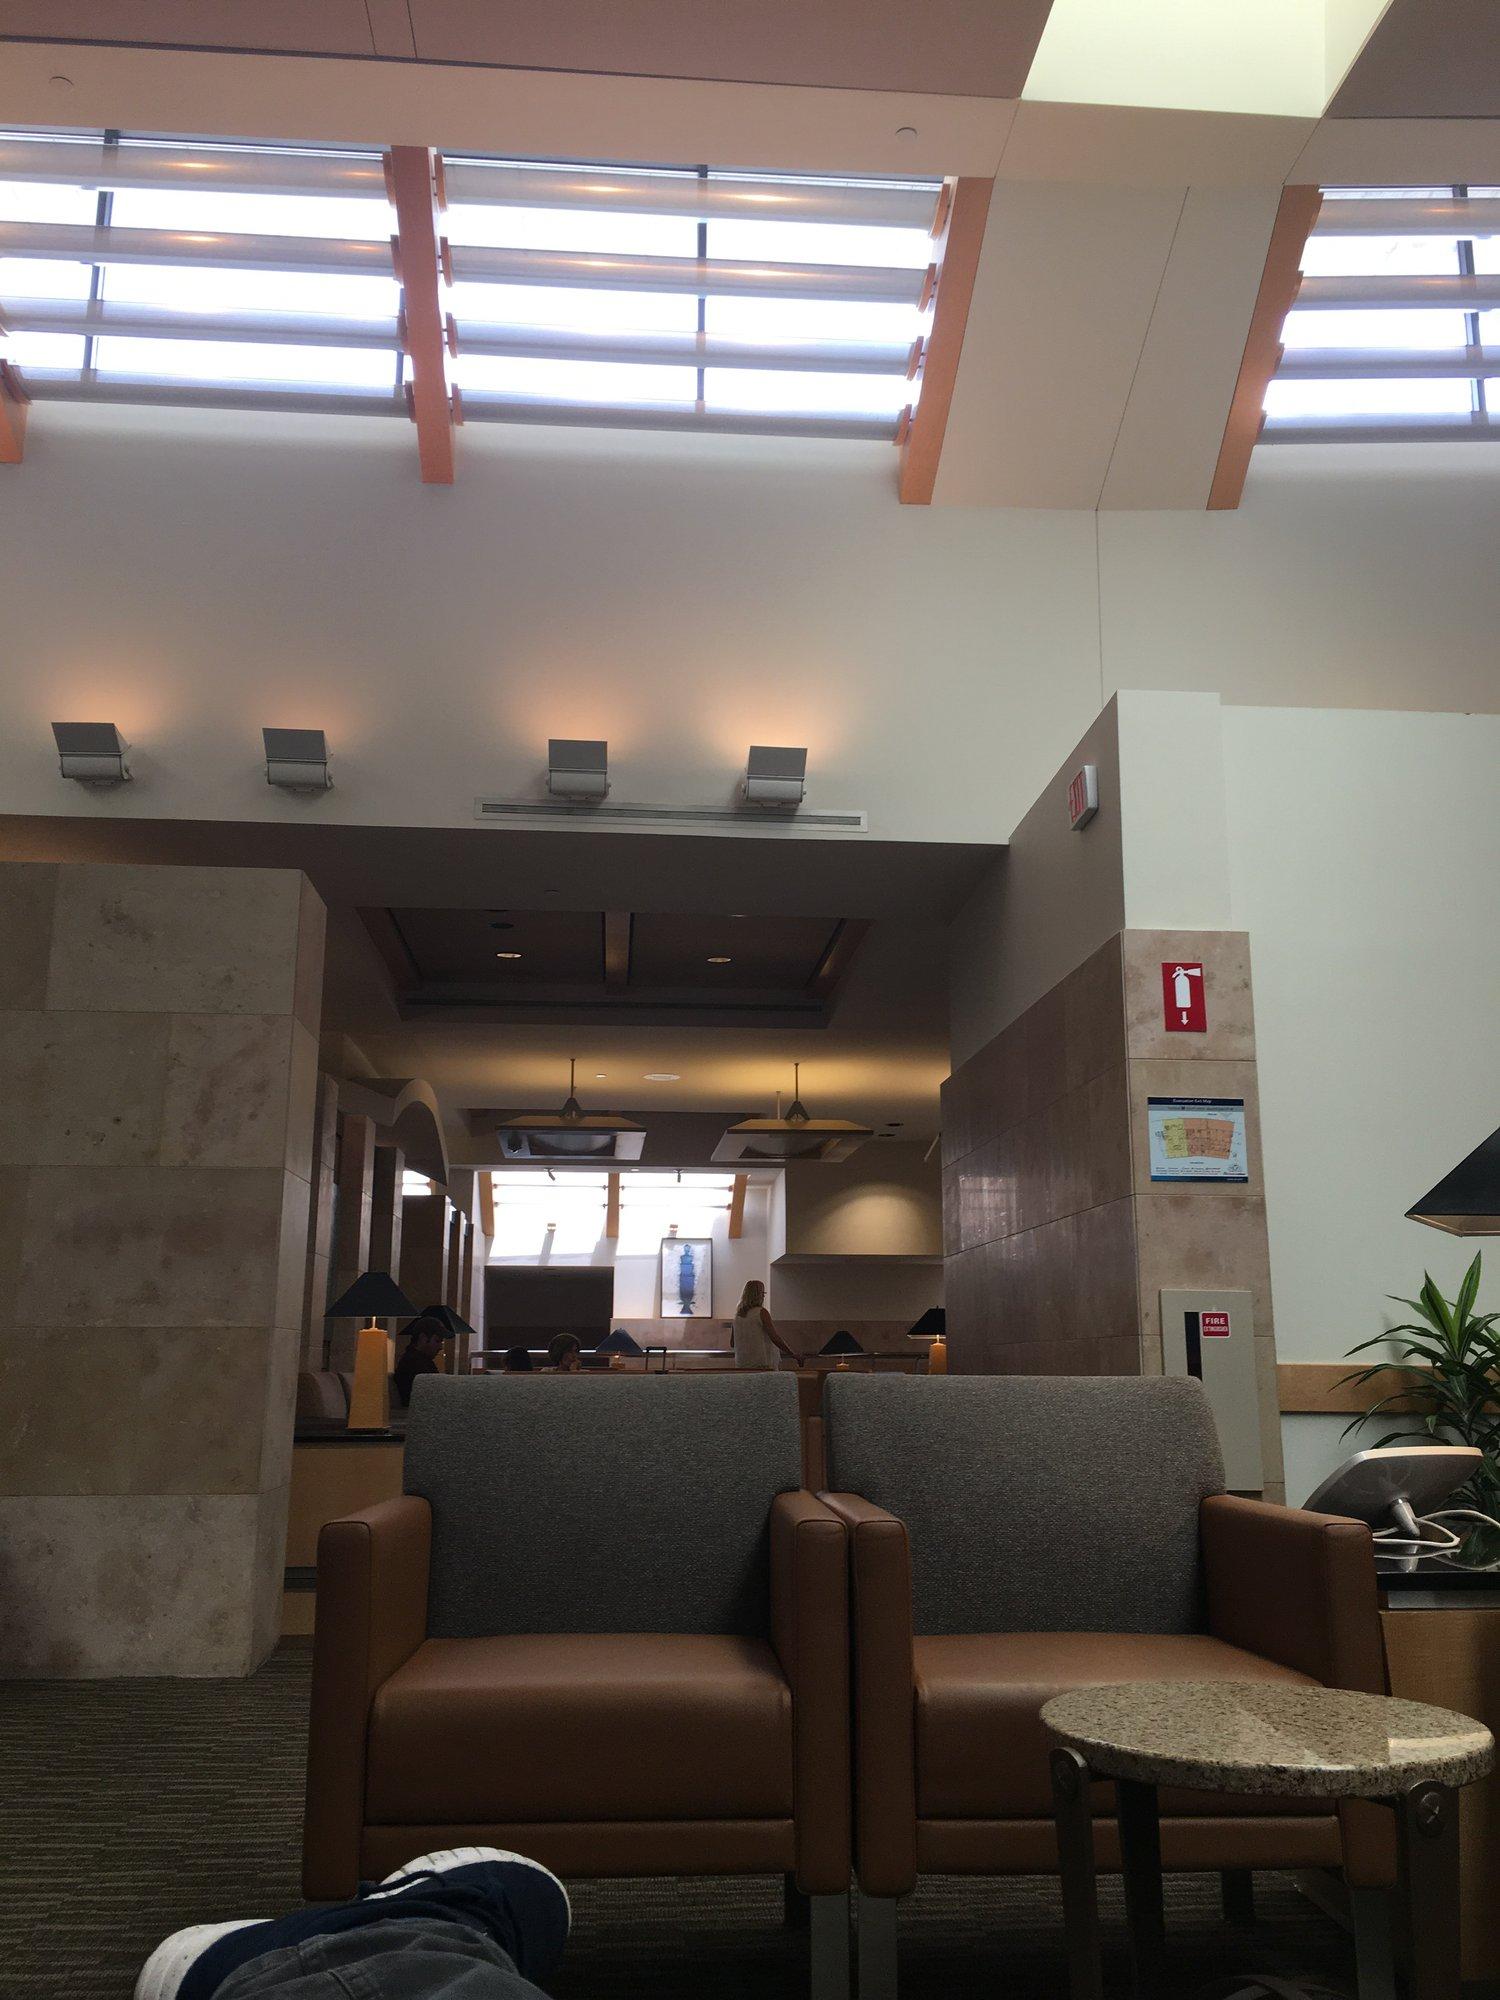 American Airlines Admirals Club image 5 of 17